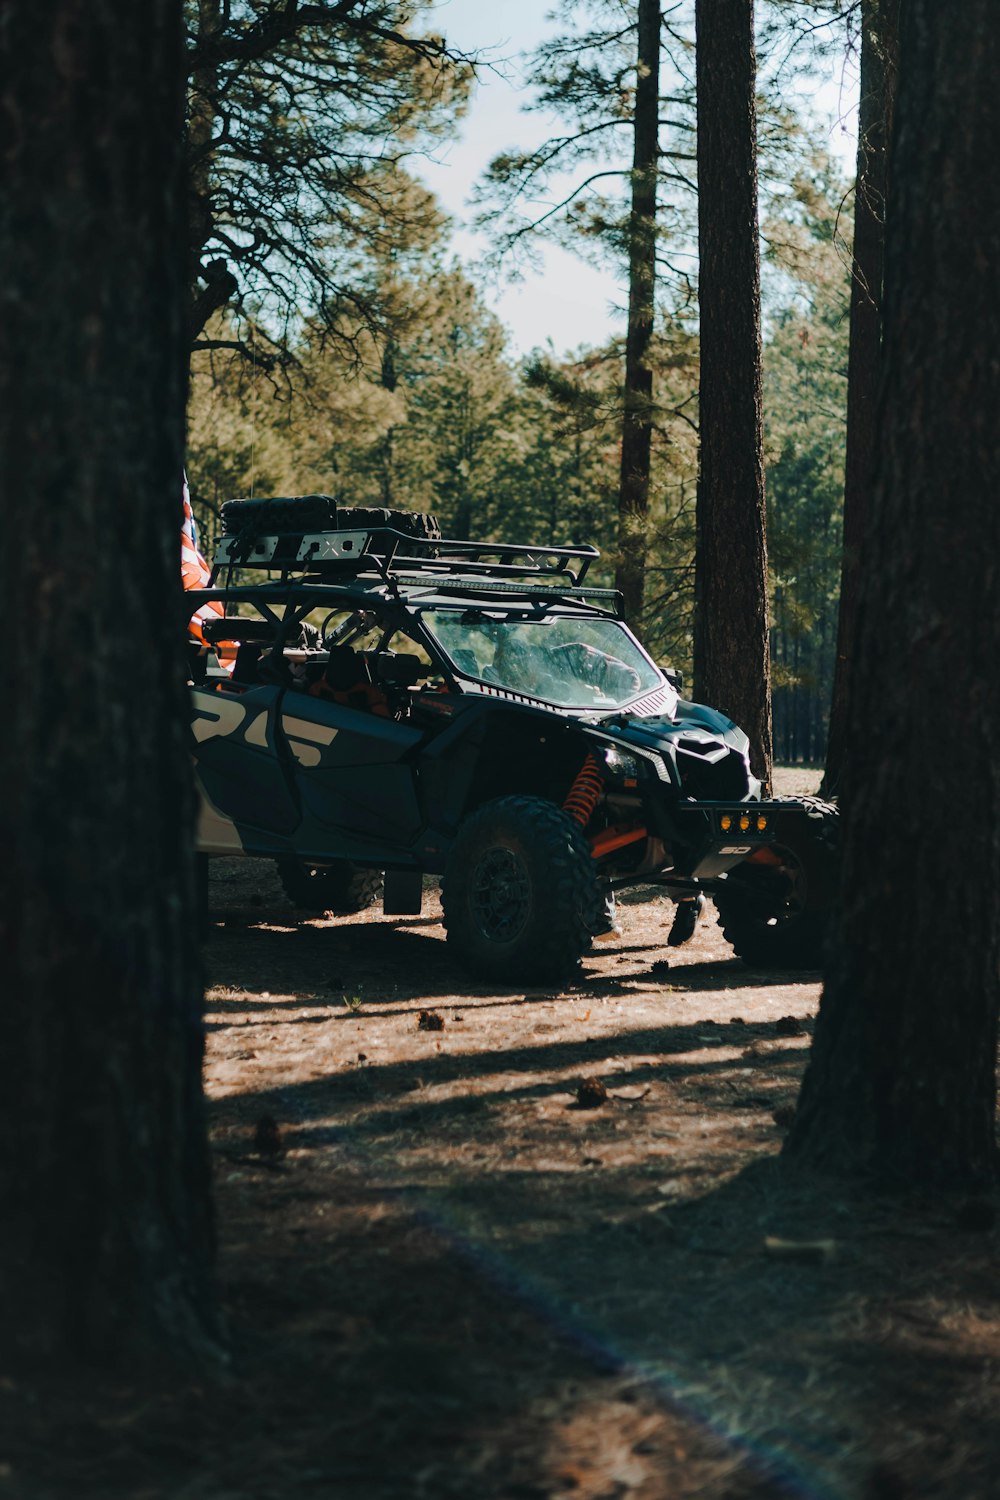 a vehicle parked in the middle of a forest